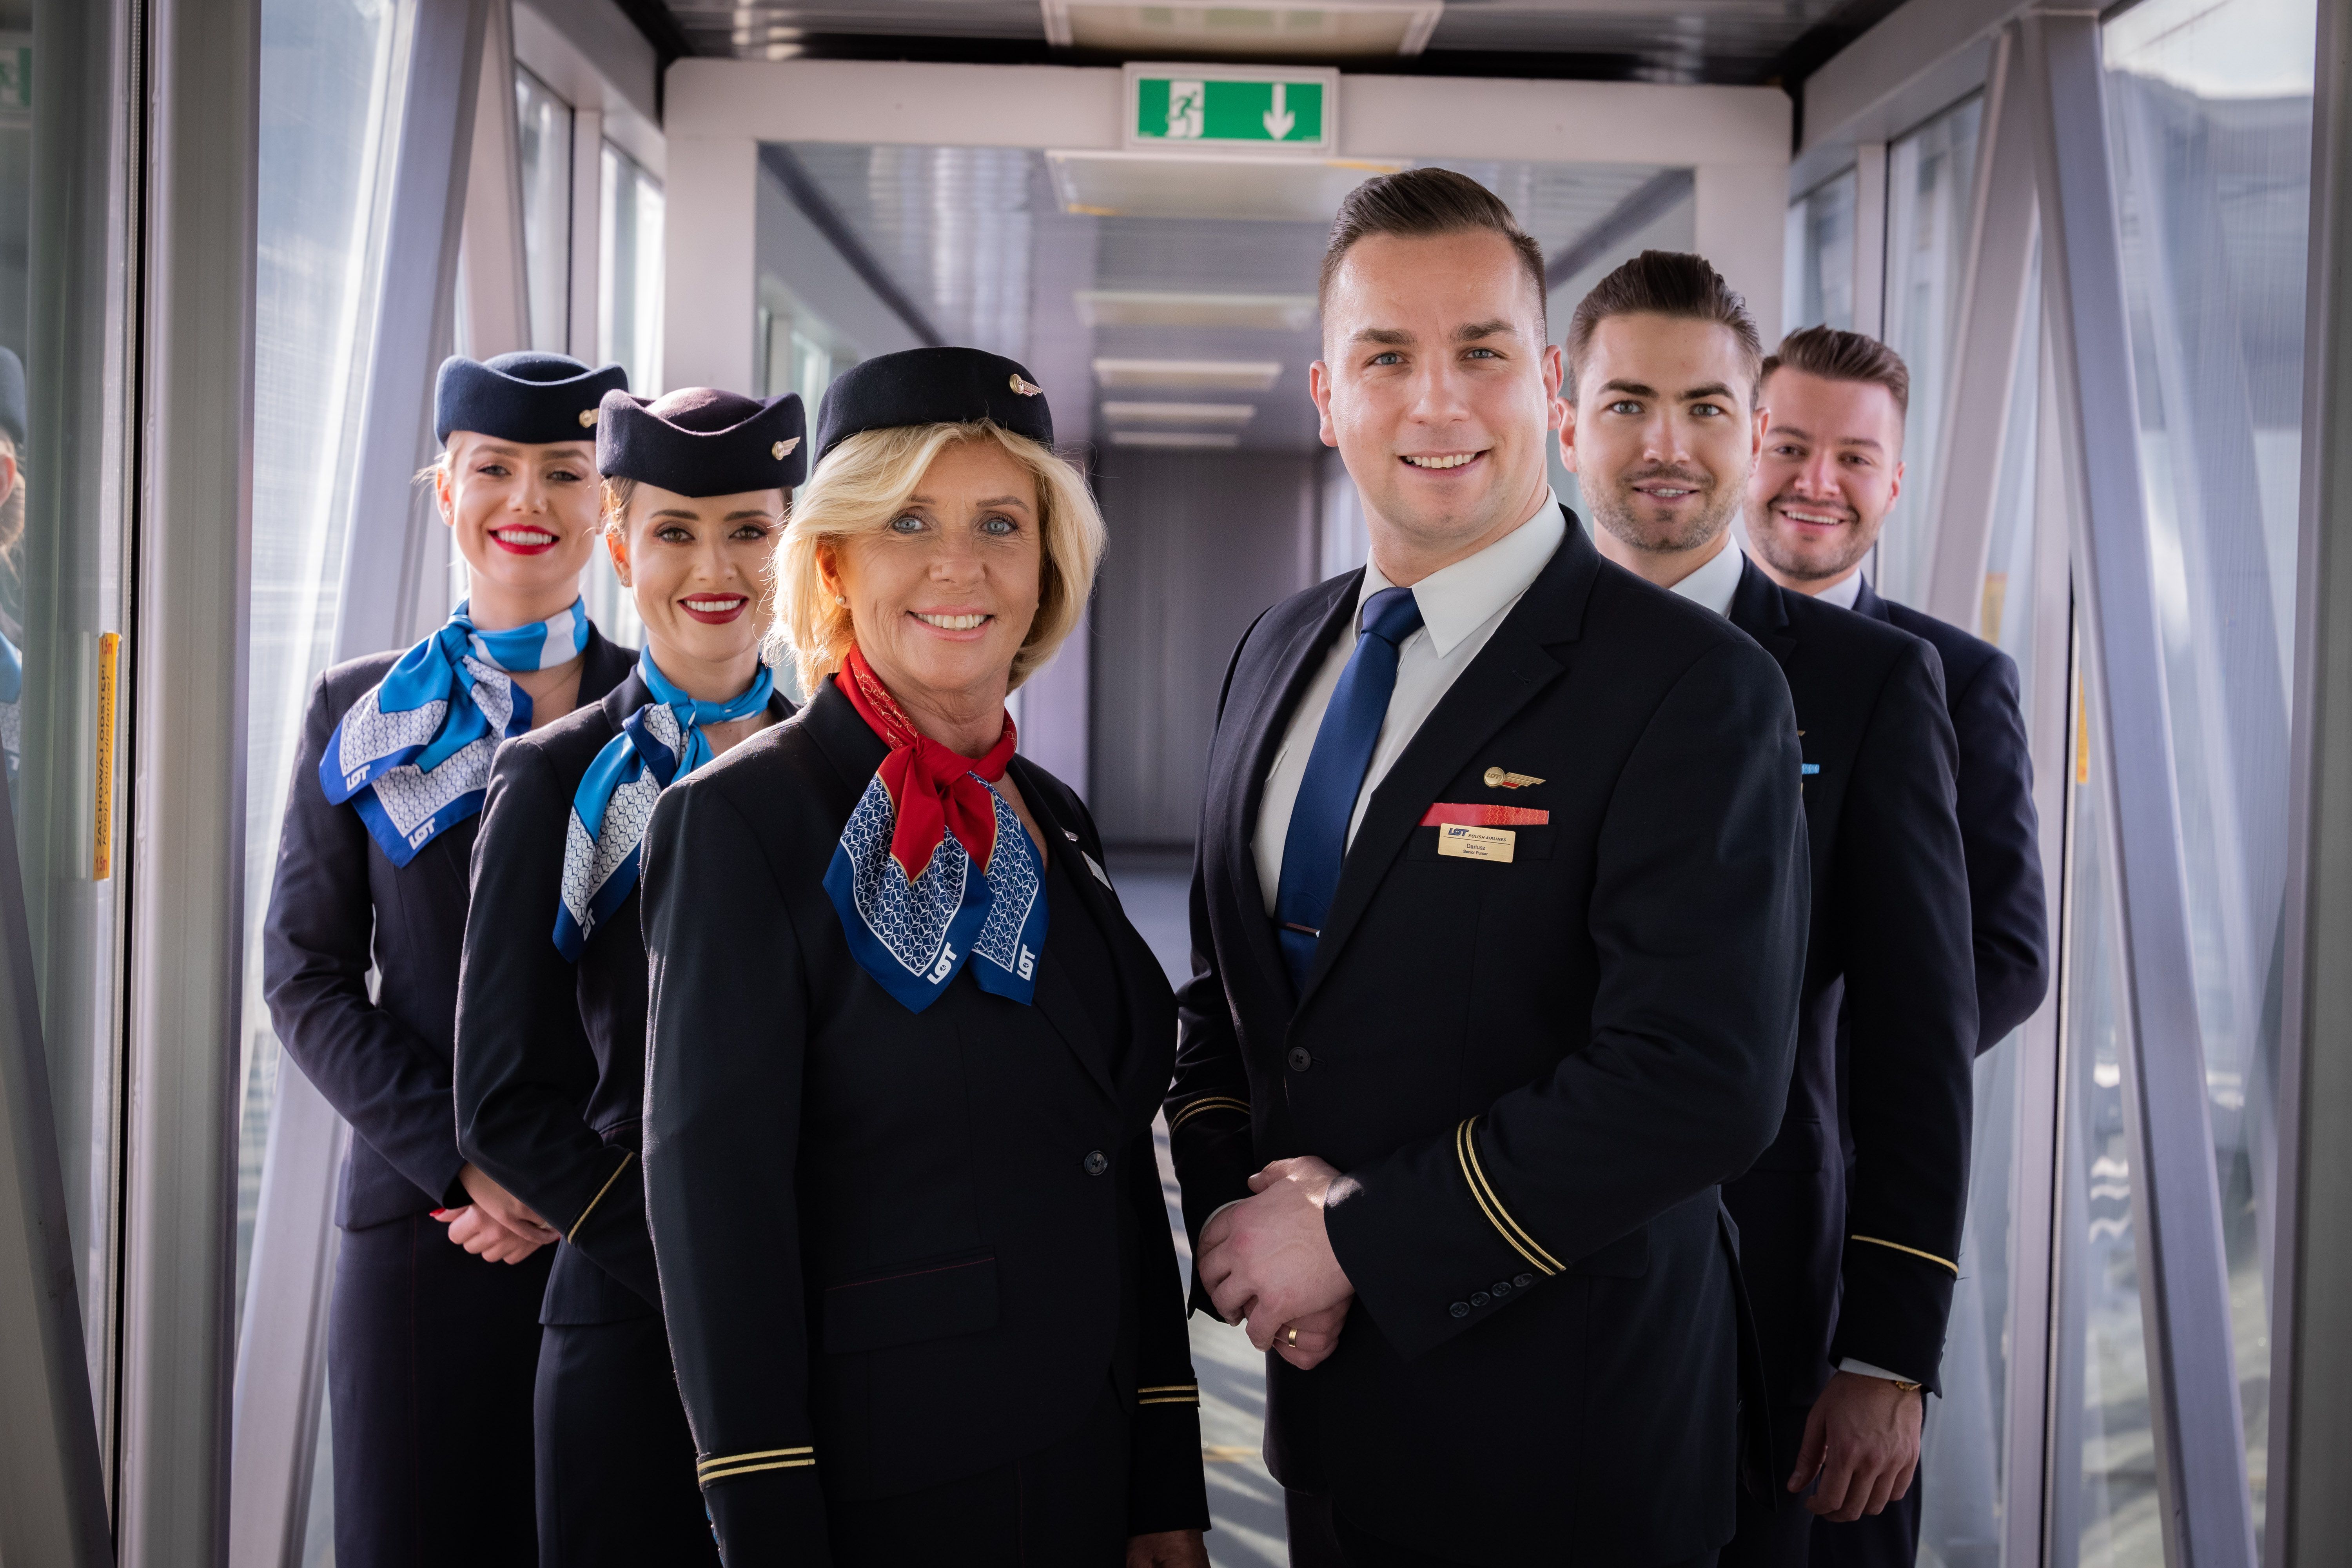 LOT Polish Airlines cabin crew